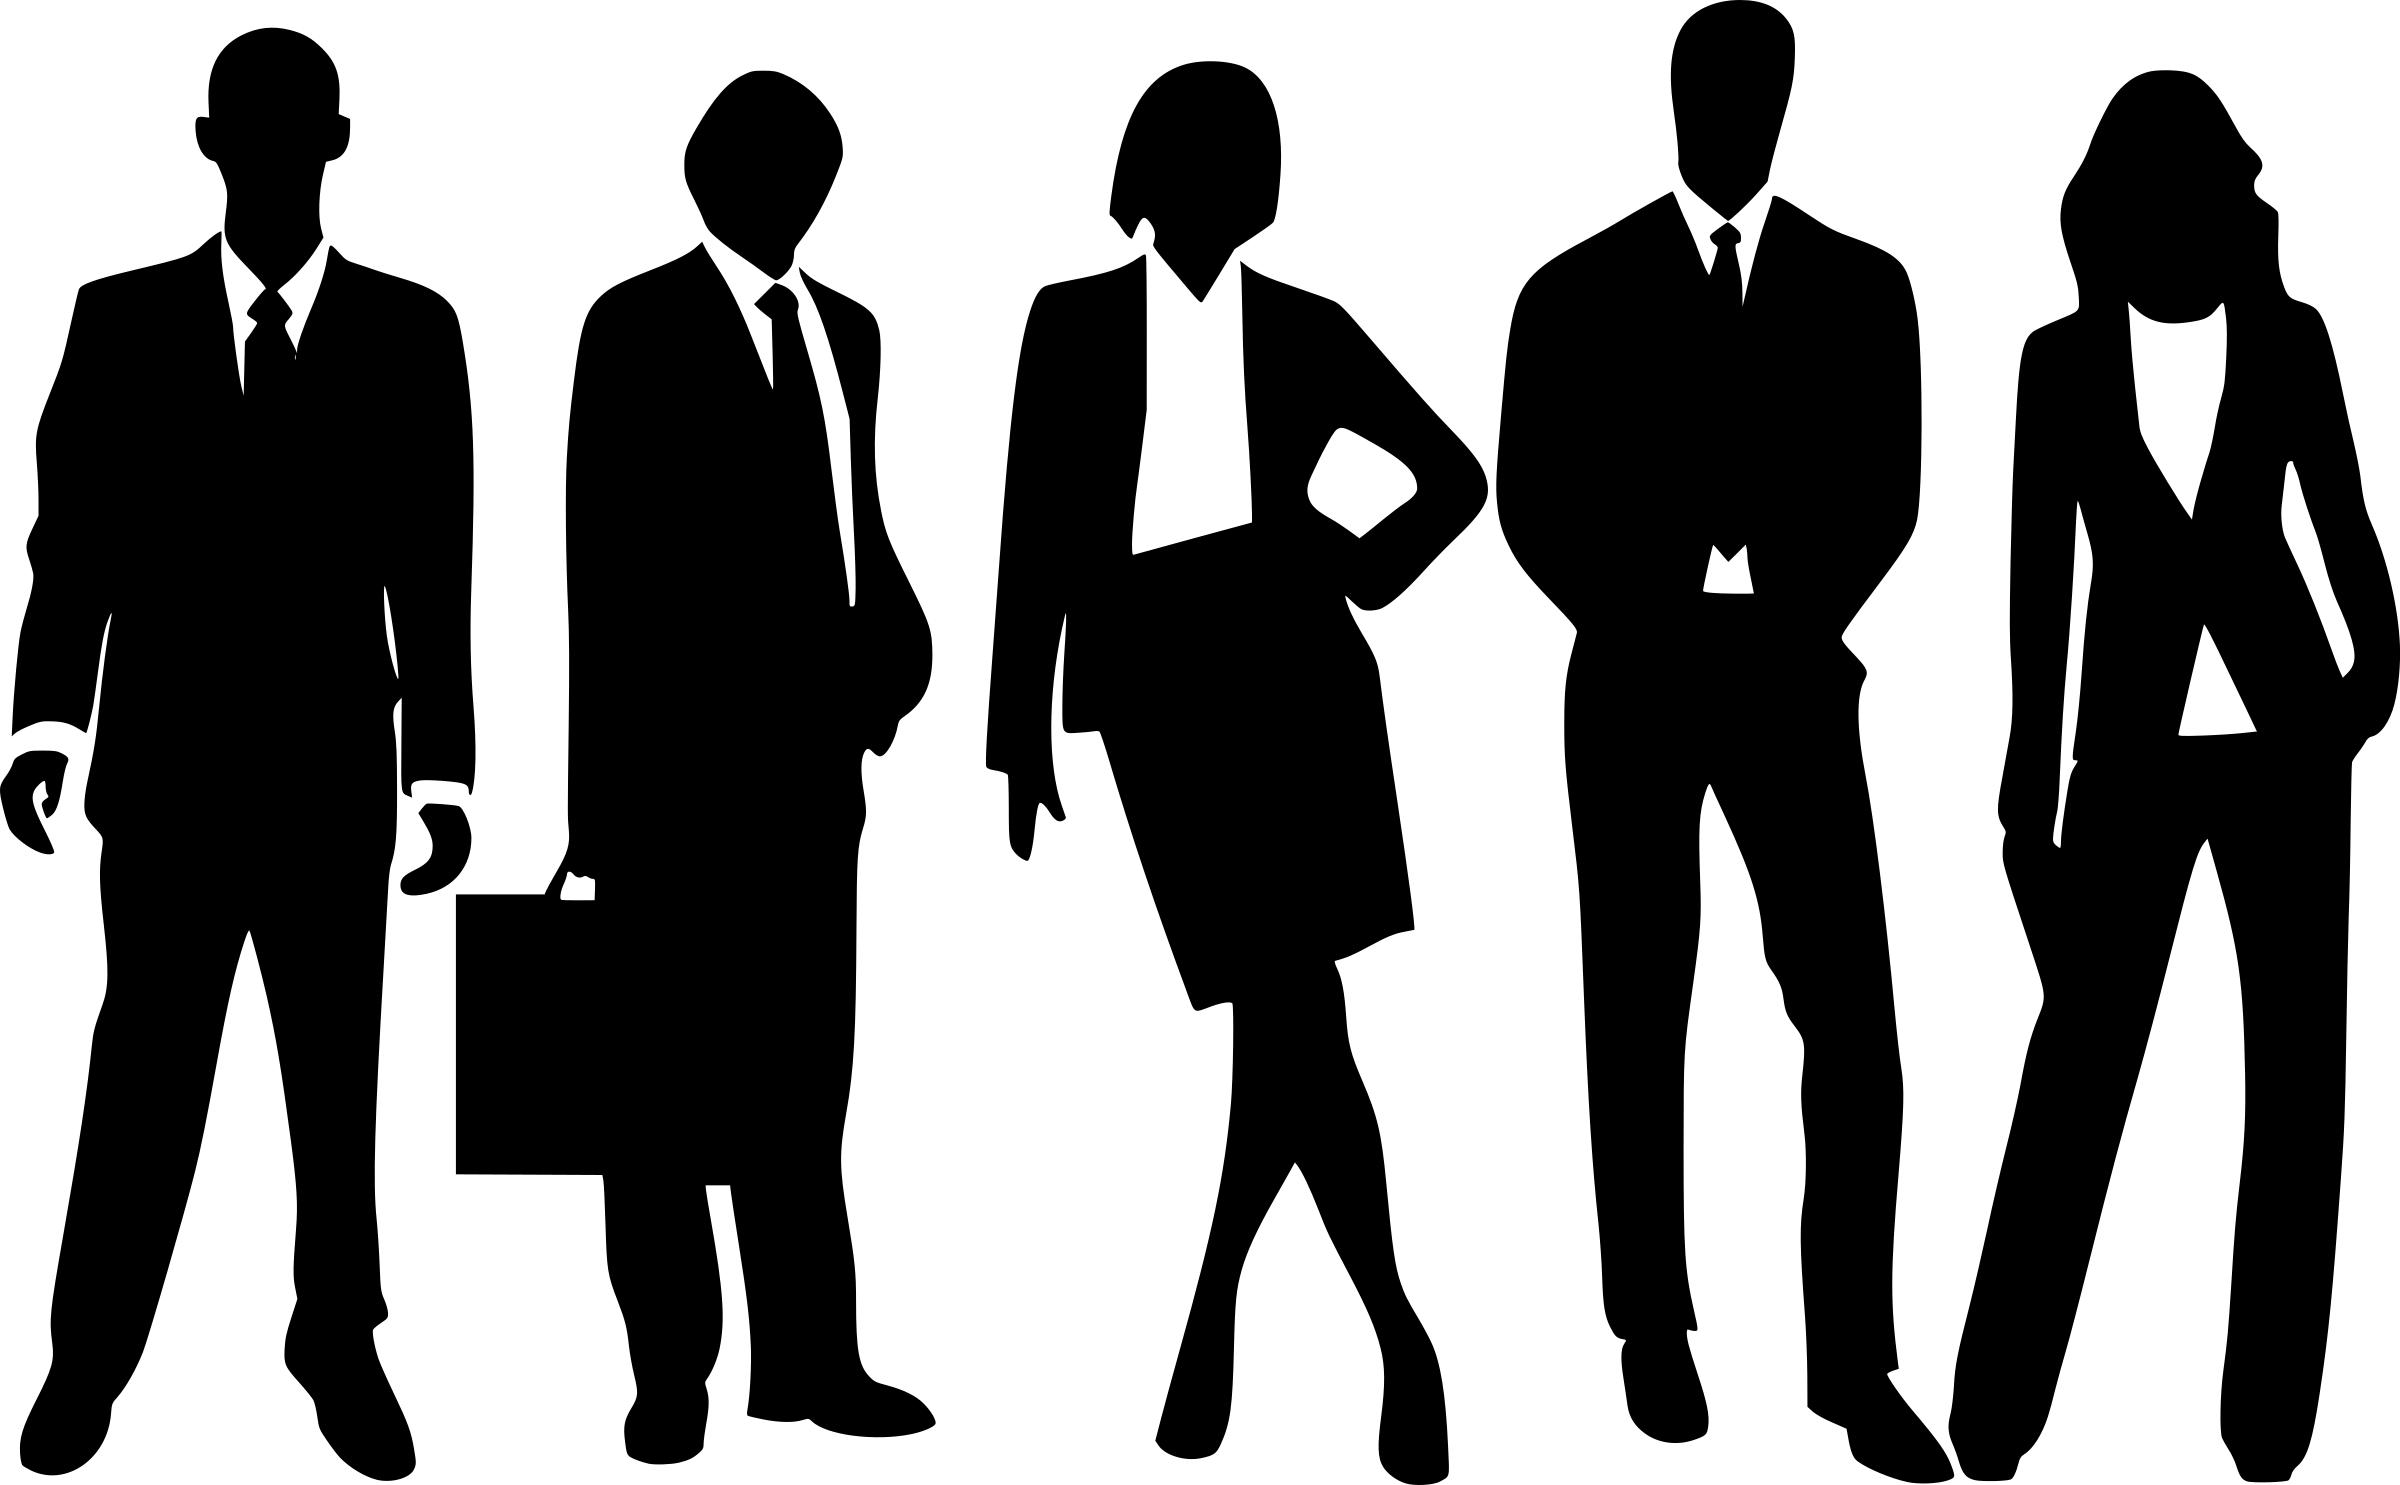 Business People Icon Png